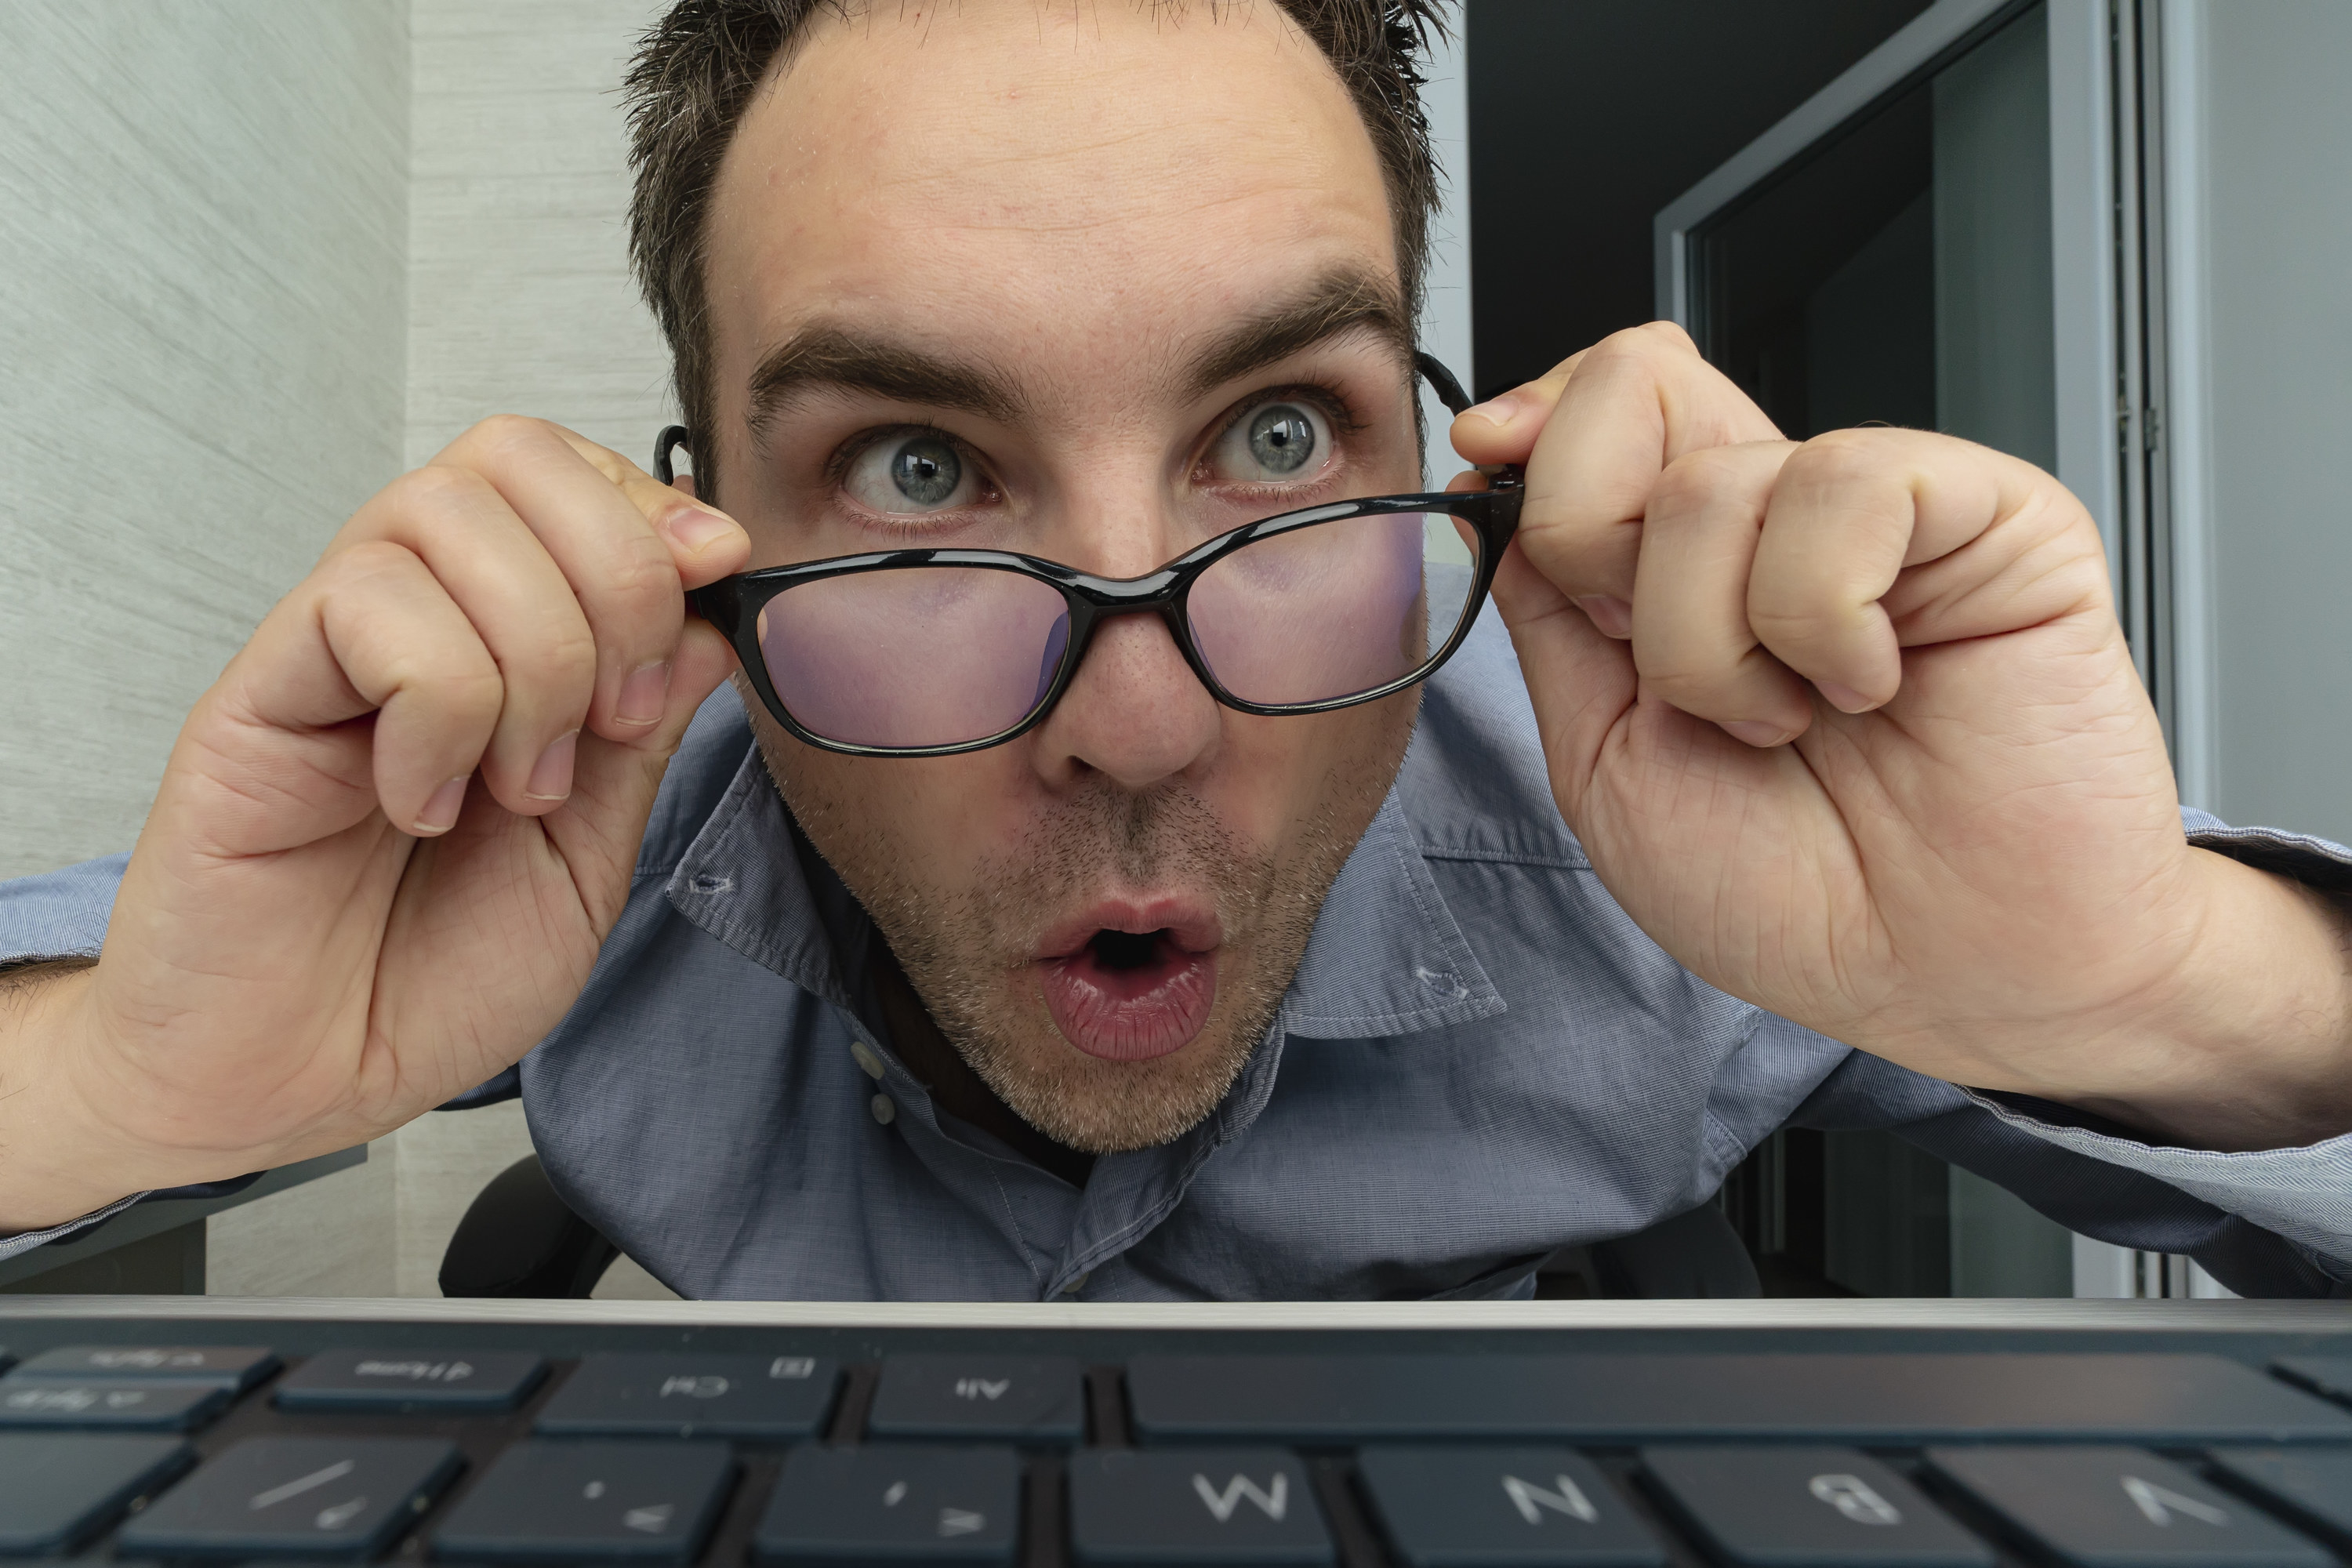 A man hovering over his computer and pulling down his glasses